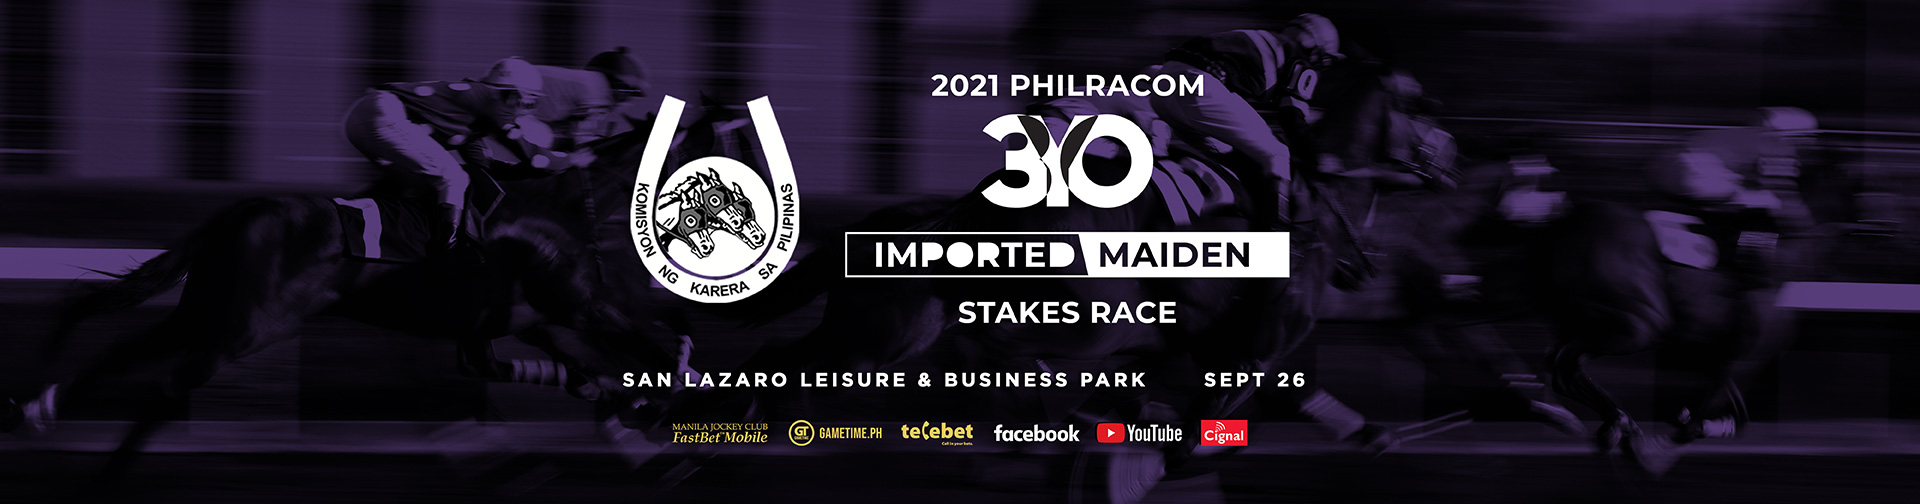 PHILRACOM (3yo) Maiden Stakes Race ( Local/Imported )